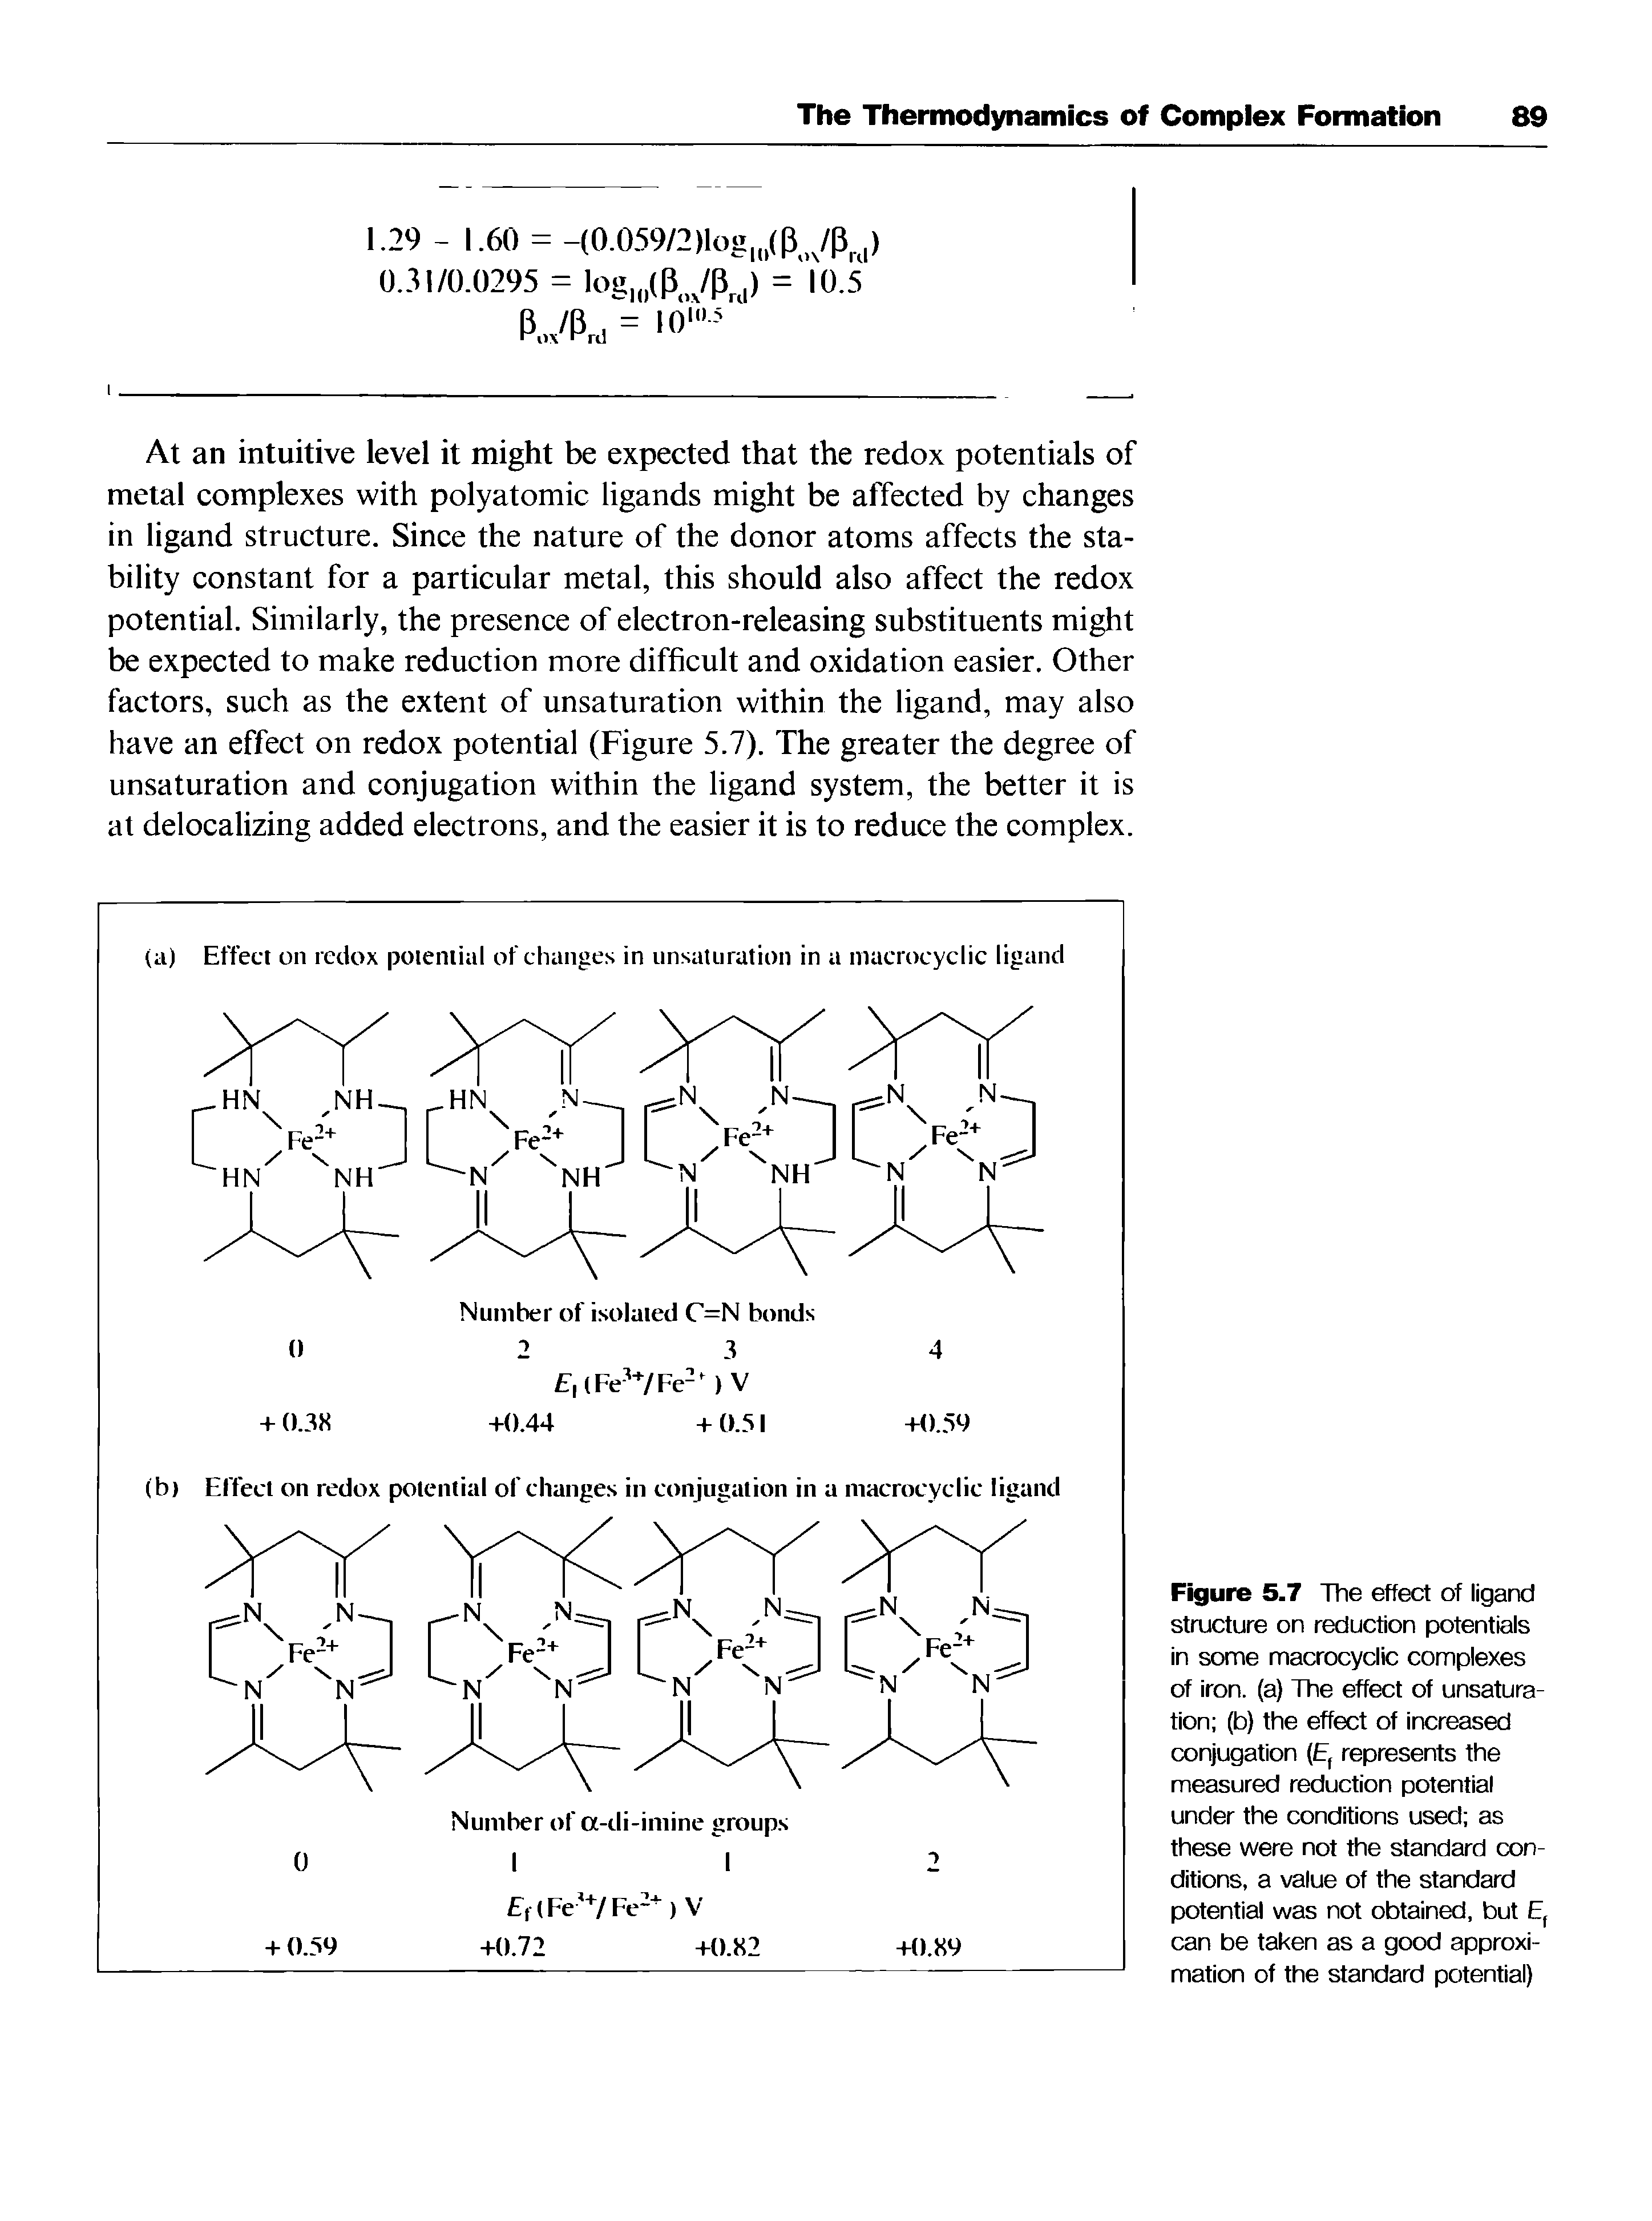 Figure 5.7 The effect of ligand structure on reduction potentials in some macrocyclic complexes of iron, (a) The effect of unsaturation (b) the effect of increased conjugation (E, represents the measured reduction potential under the conditions used as these were not the standard conditions, a value of the standard potential was not obtained, but E, can be taken as a good approximation of the standard potential)...